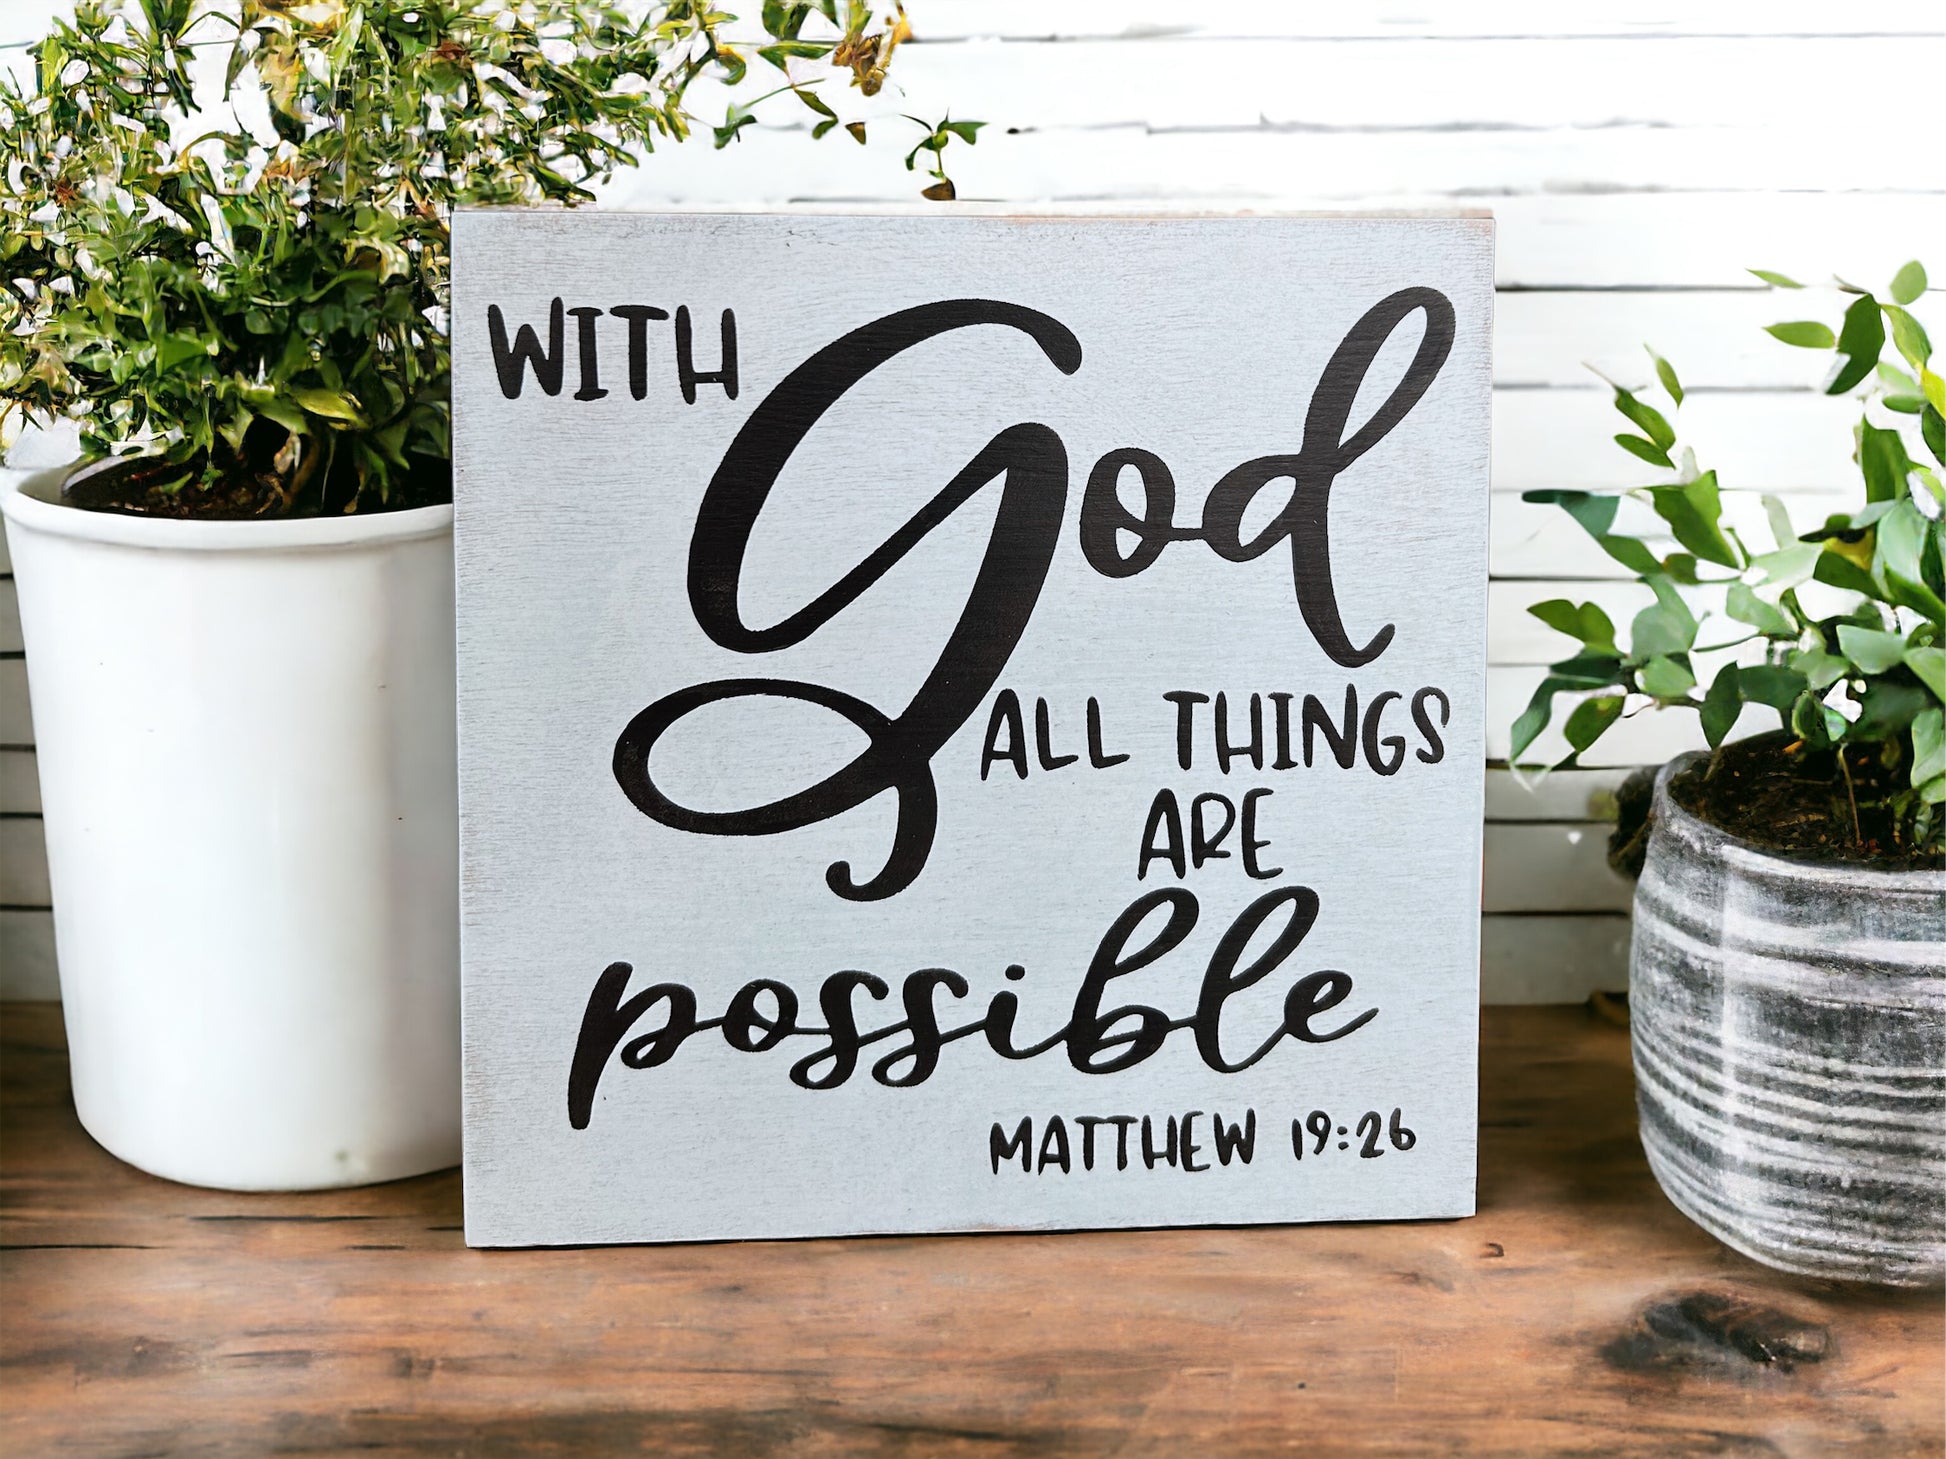 "All things are possible" wood sign